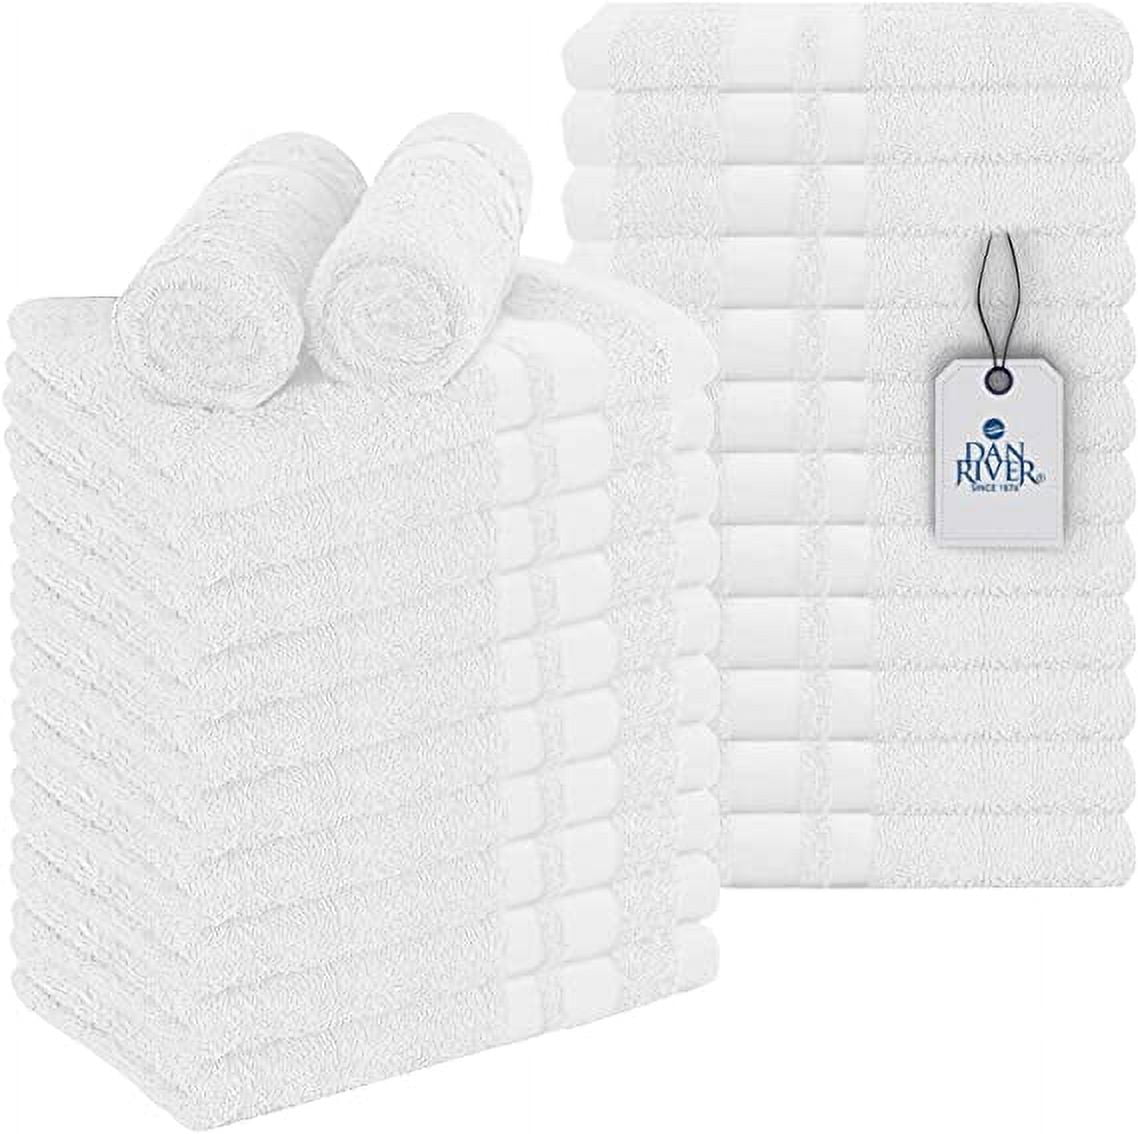 Premium Hand Towels 16x27 3.25 lb 100% Ringspun Cotton with Fancy Border - Case of 12, Size: 16 x 27, White